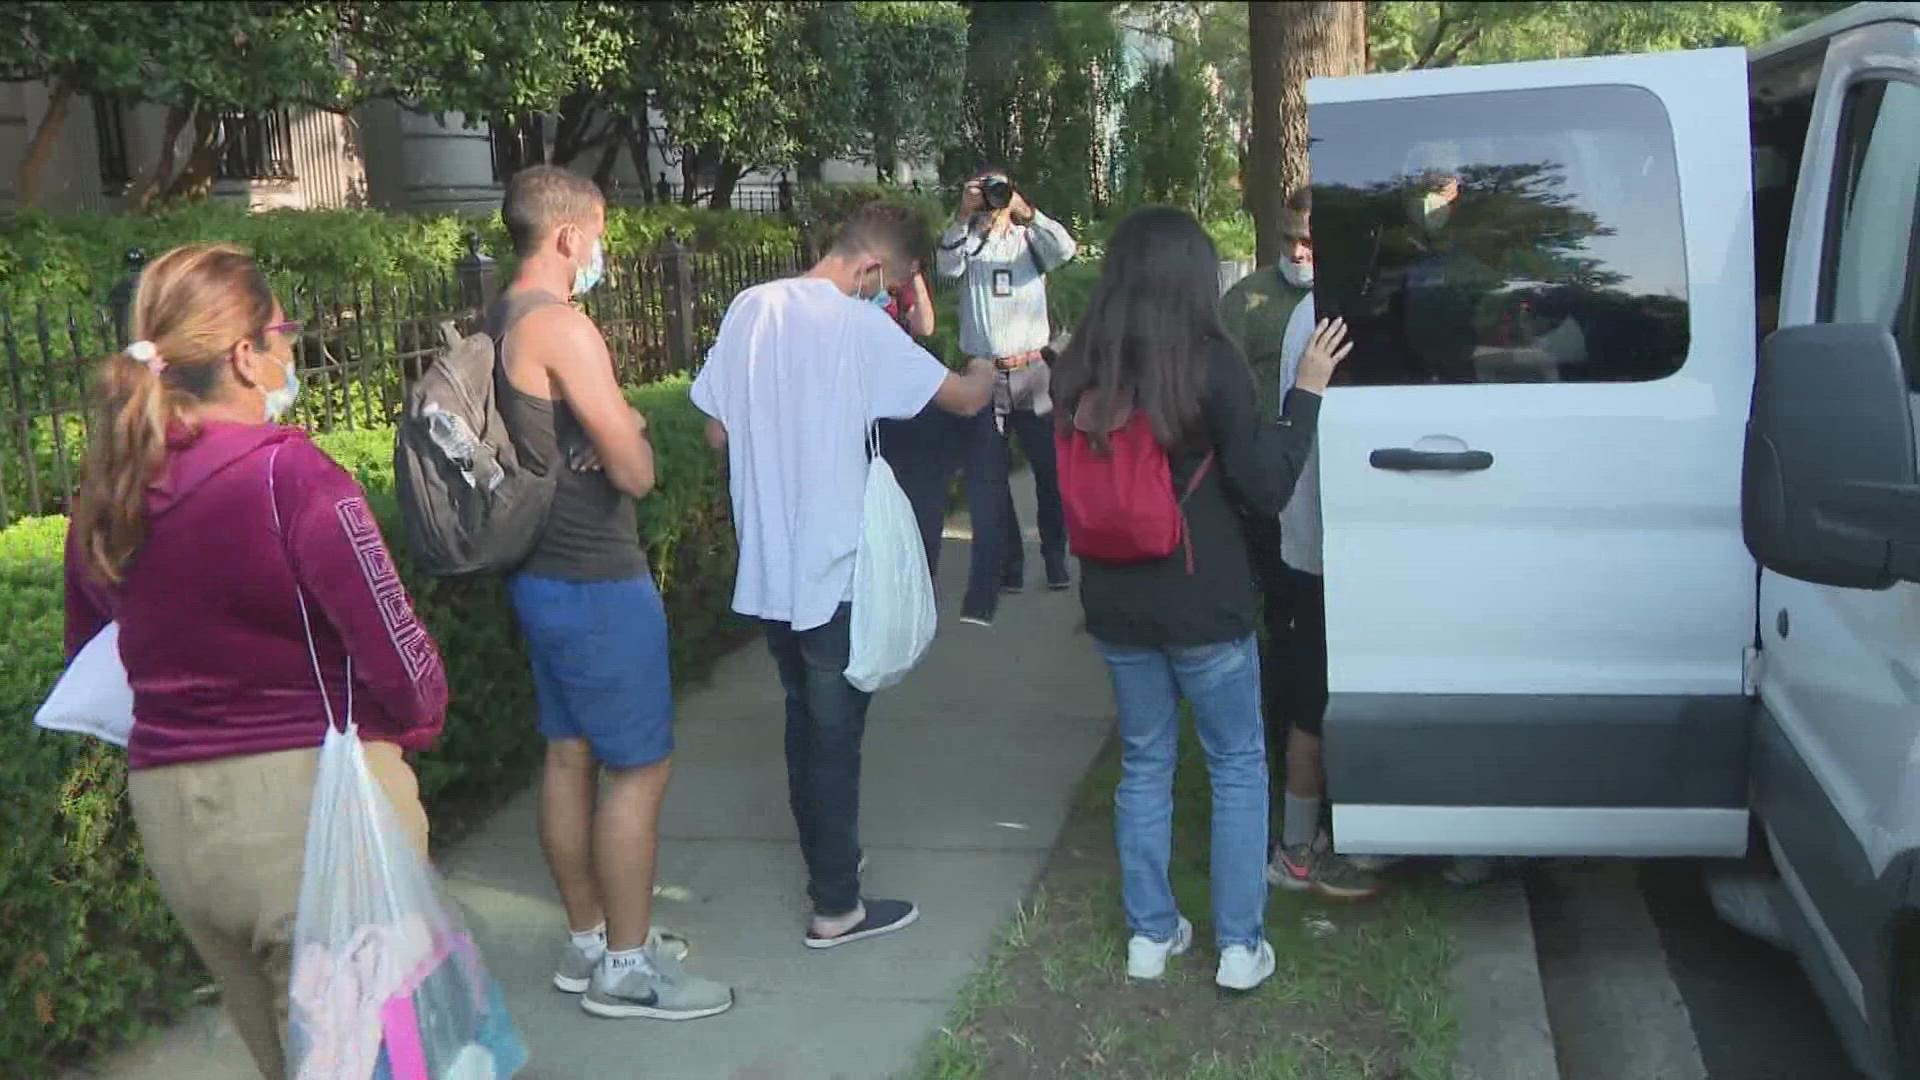 On Thursday, more than 100 migrants from Texas arrived at the Naval Observatory in D.C., just outside of the vice president's house.